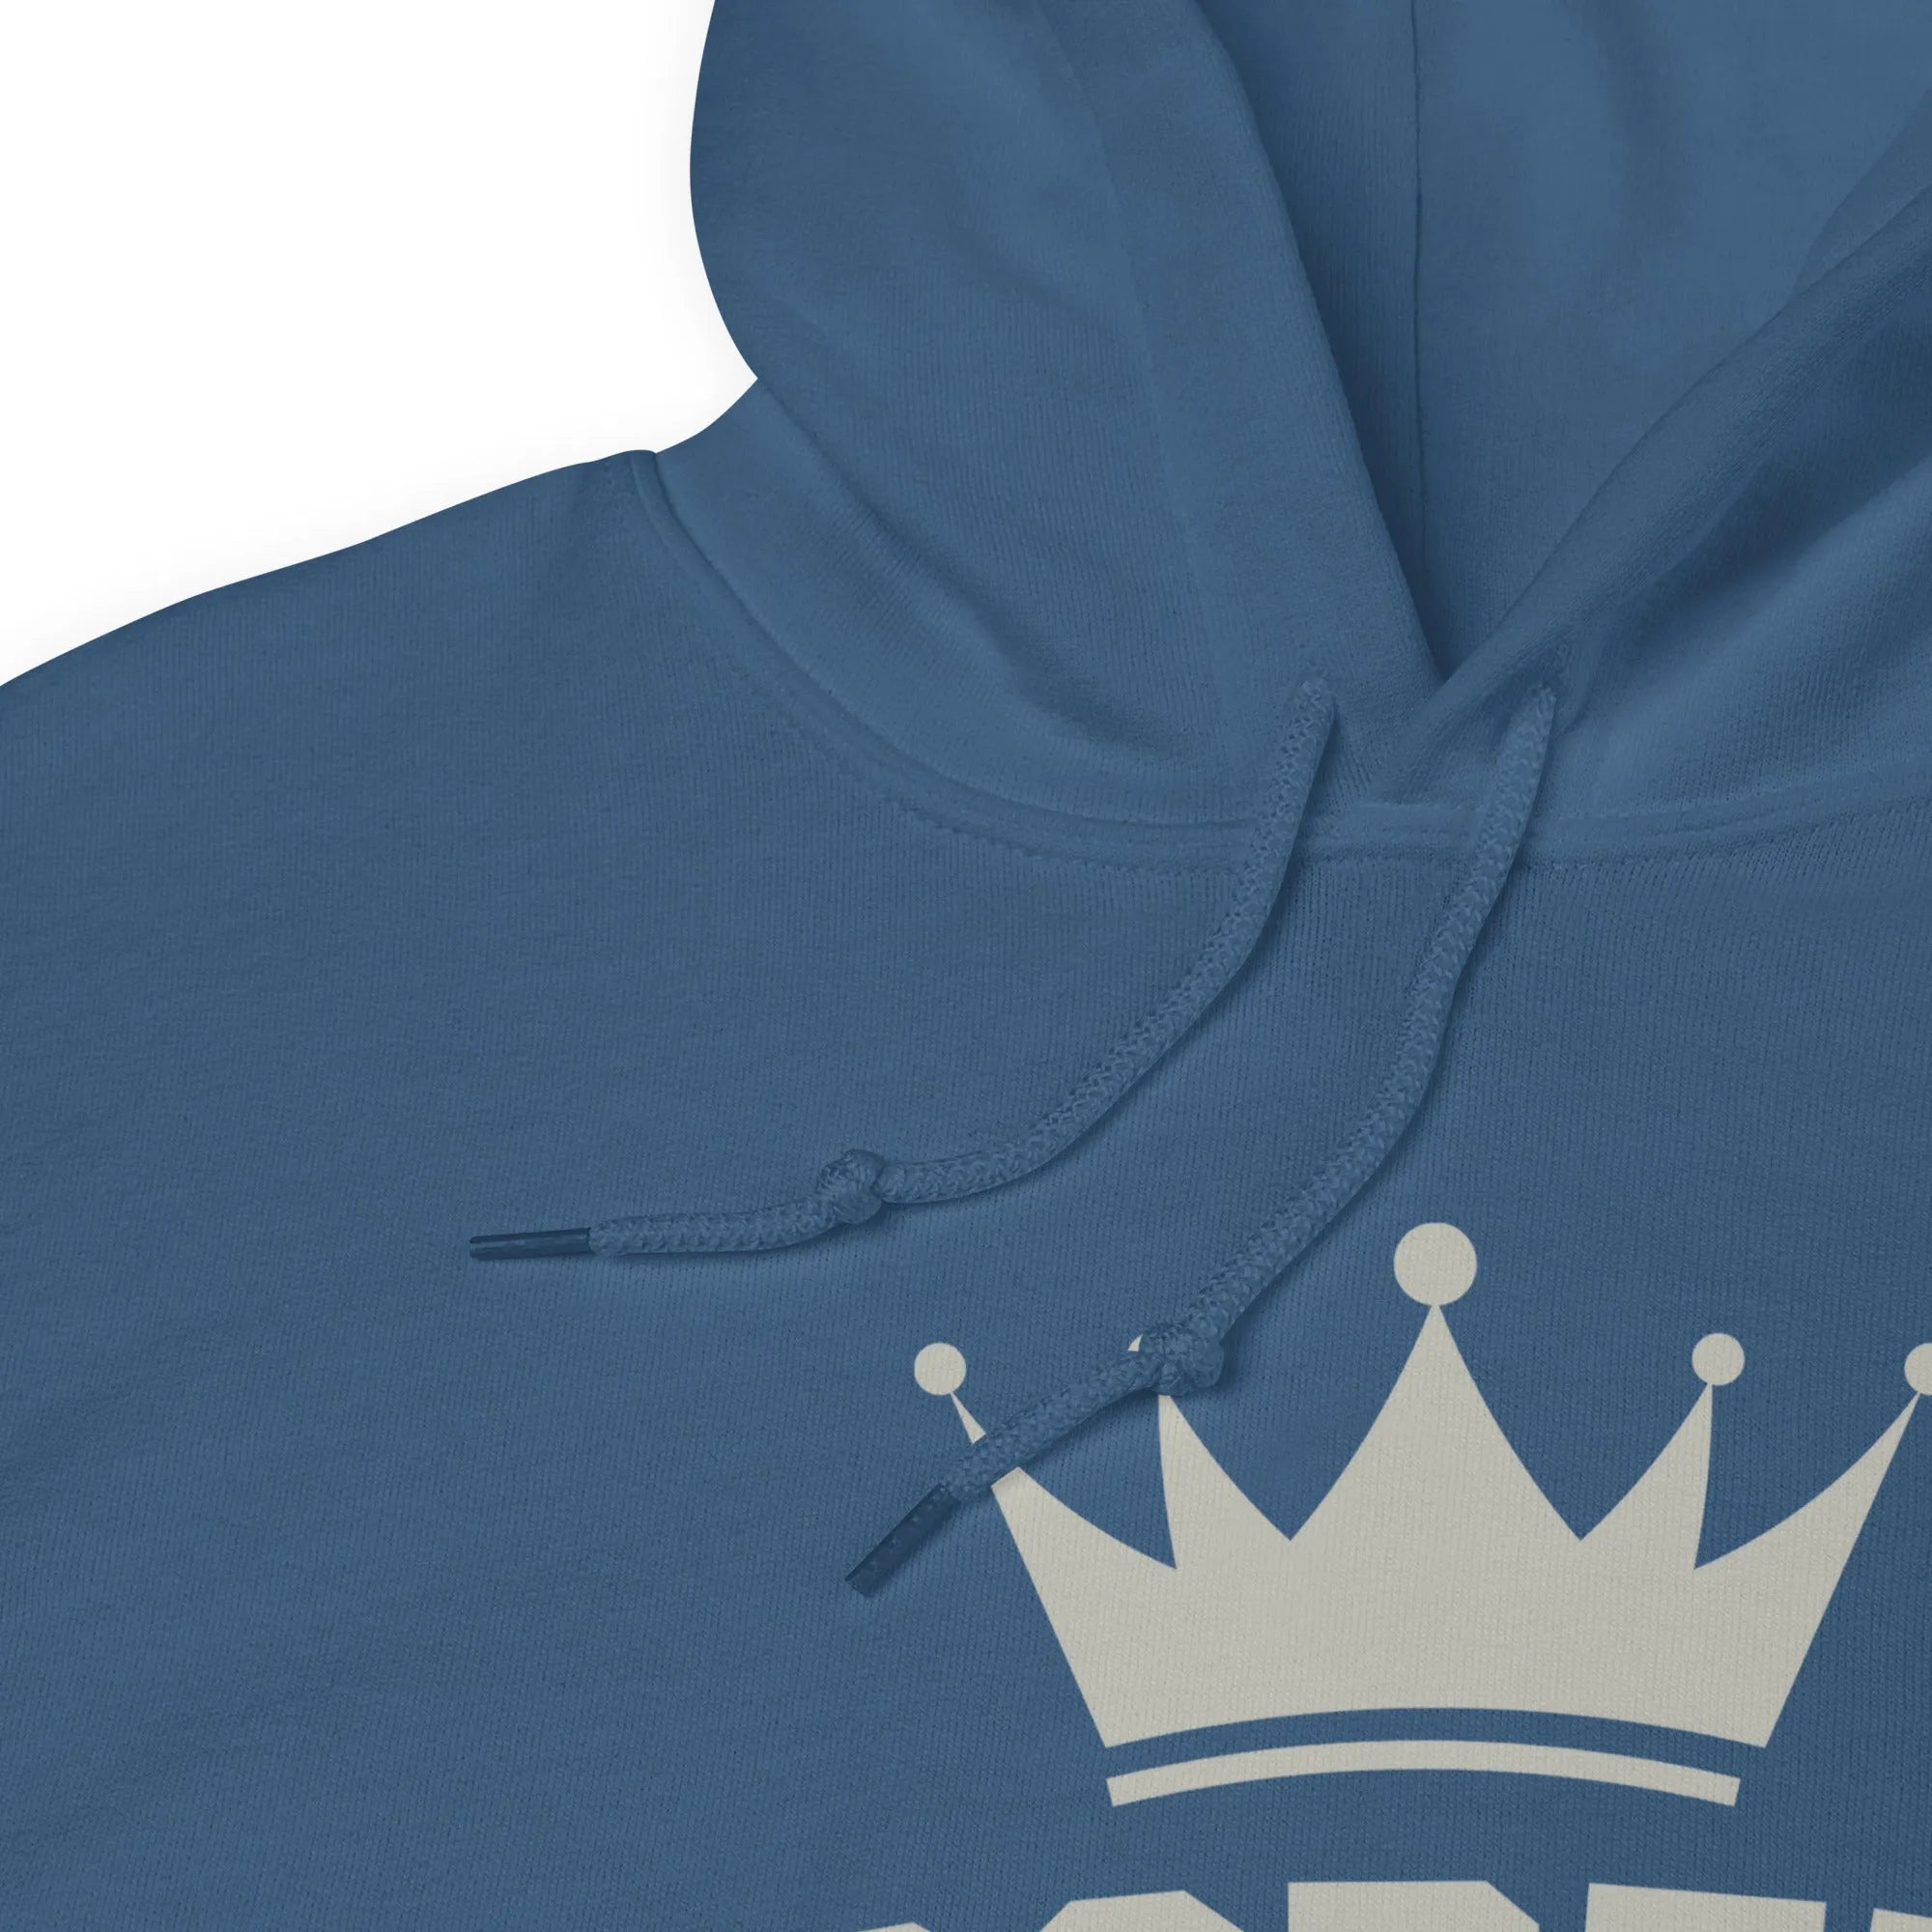 Sober King Hoodie: Embrace Your Sobriety and Reign Supreme - Sobervation